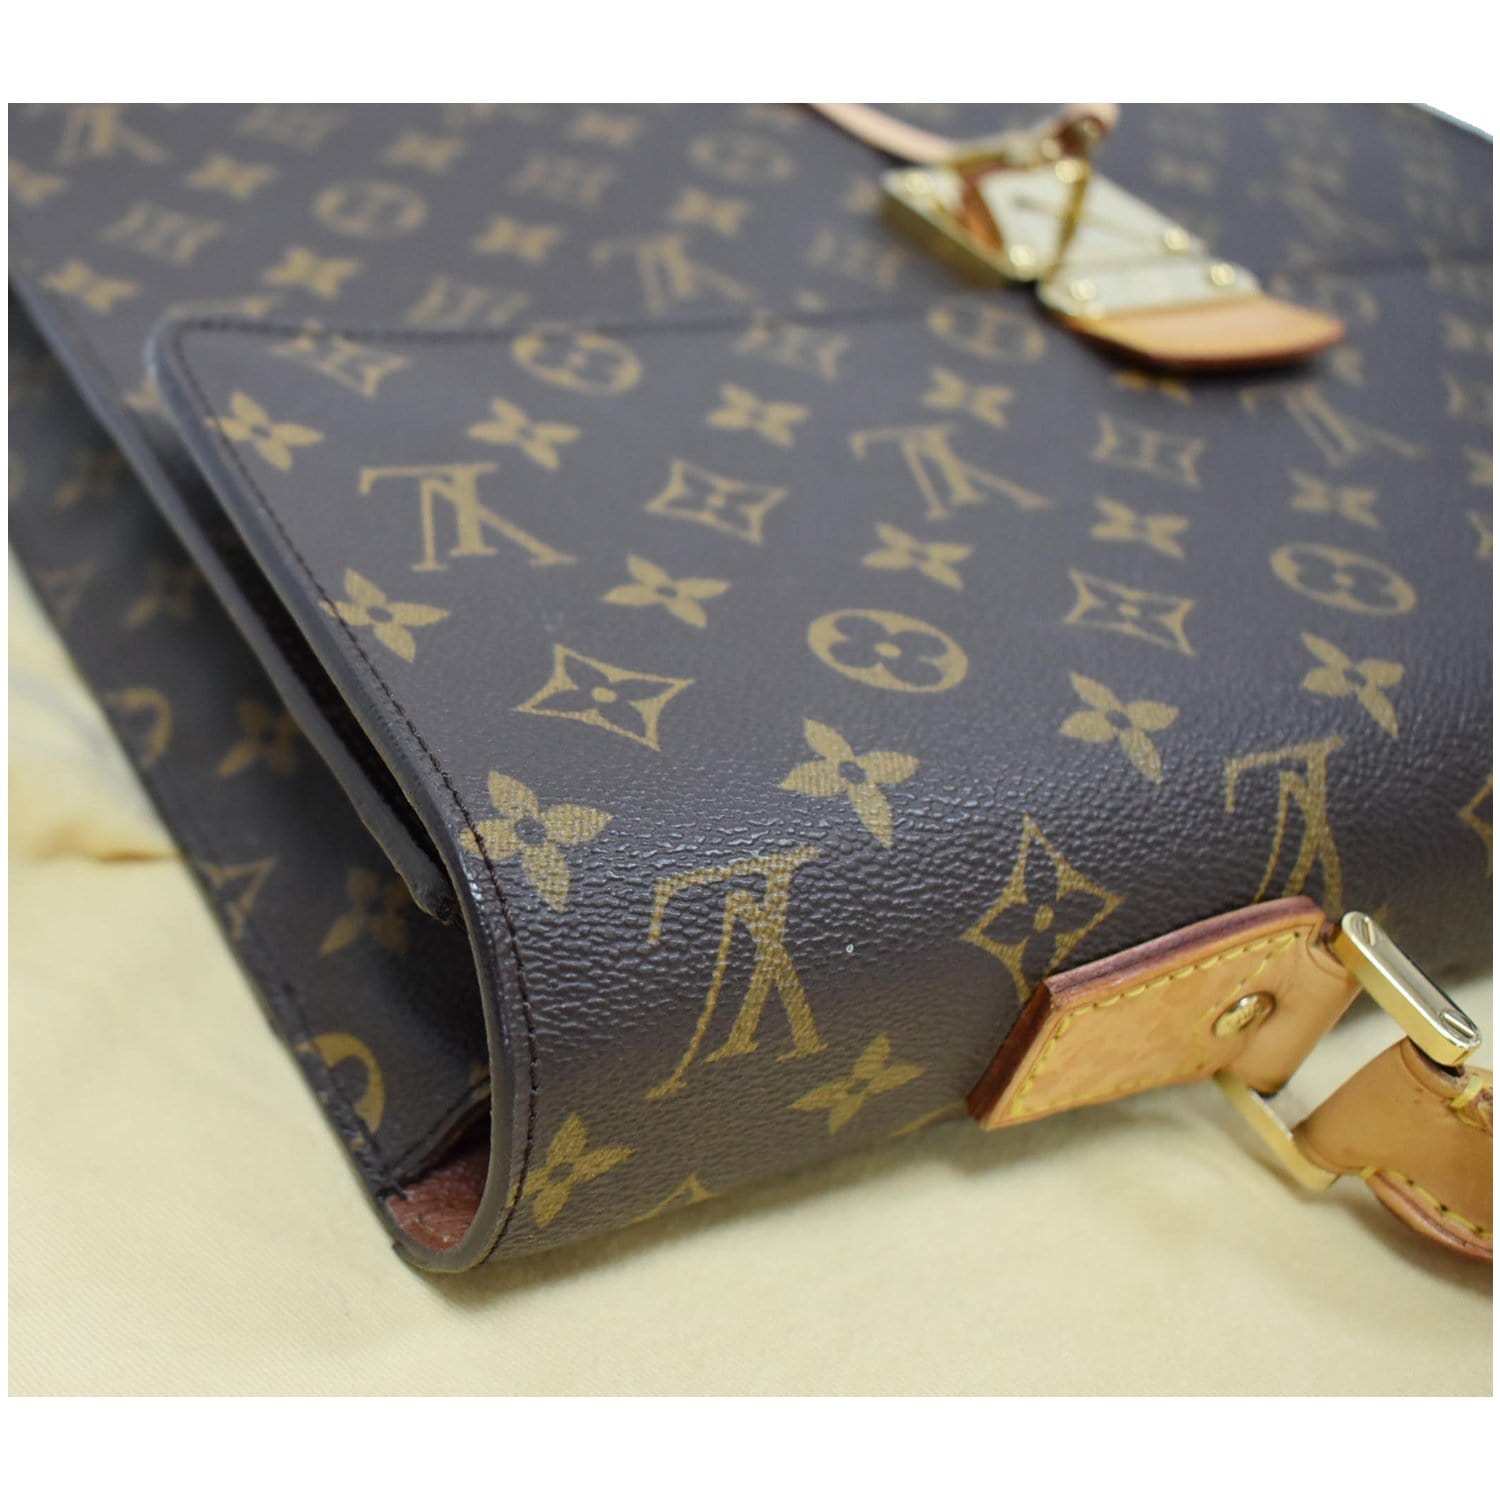 Louis Vuitton is releasing a new handbag in monogram canvas! What